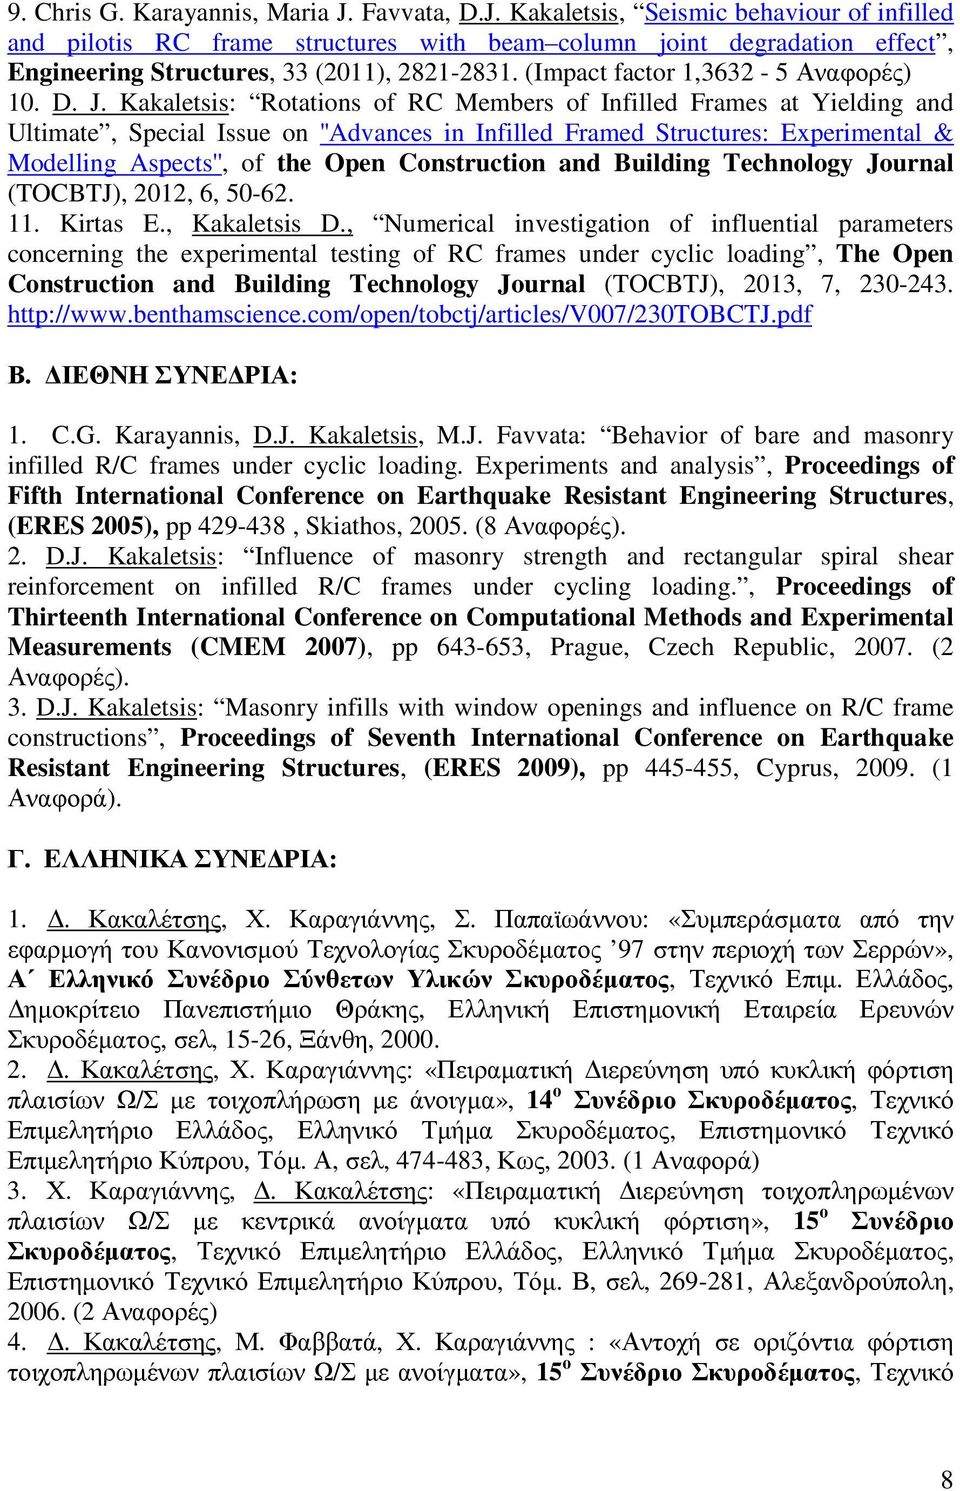 Kakaletsis: Rotations of RC Members of Infilled Frames at Yielding and Ultimate, Special Issue on ''Advances in Infilled Framed Structures: Experimental & Modelling Aspects'', of the Open